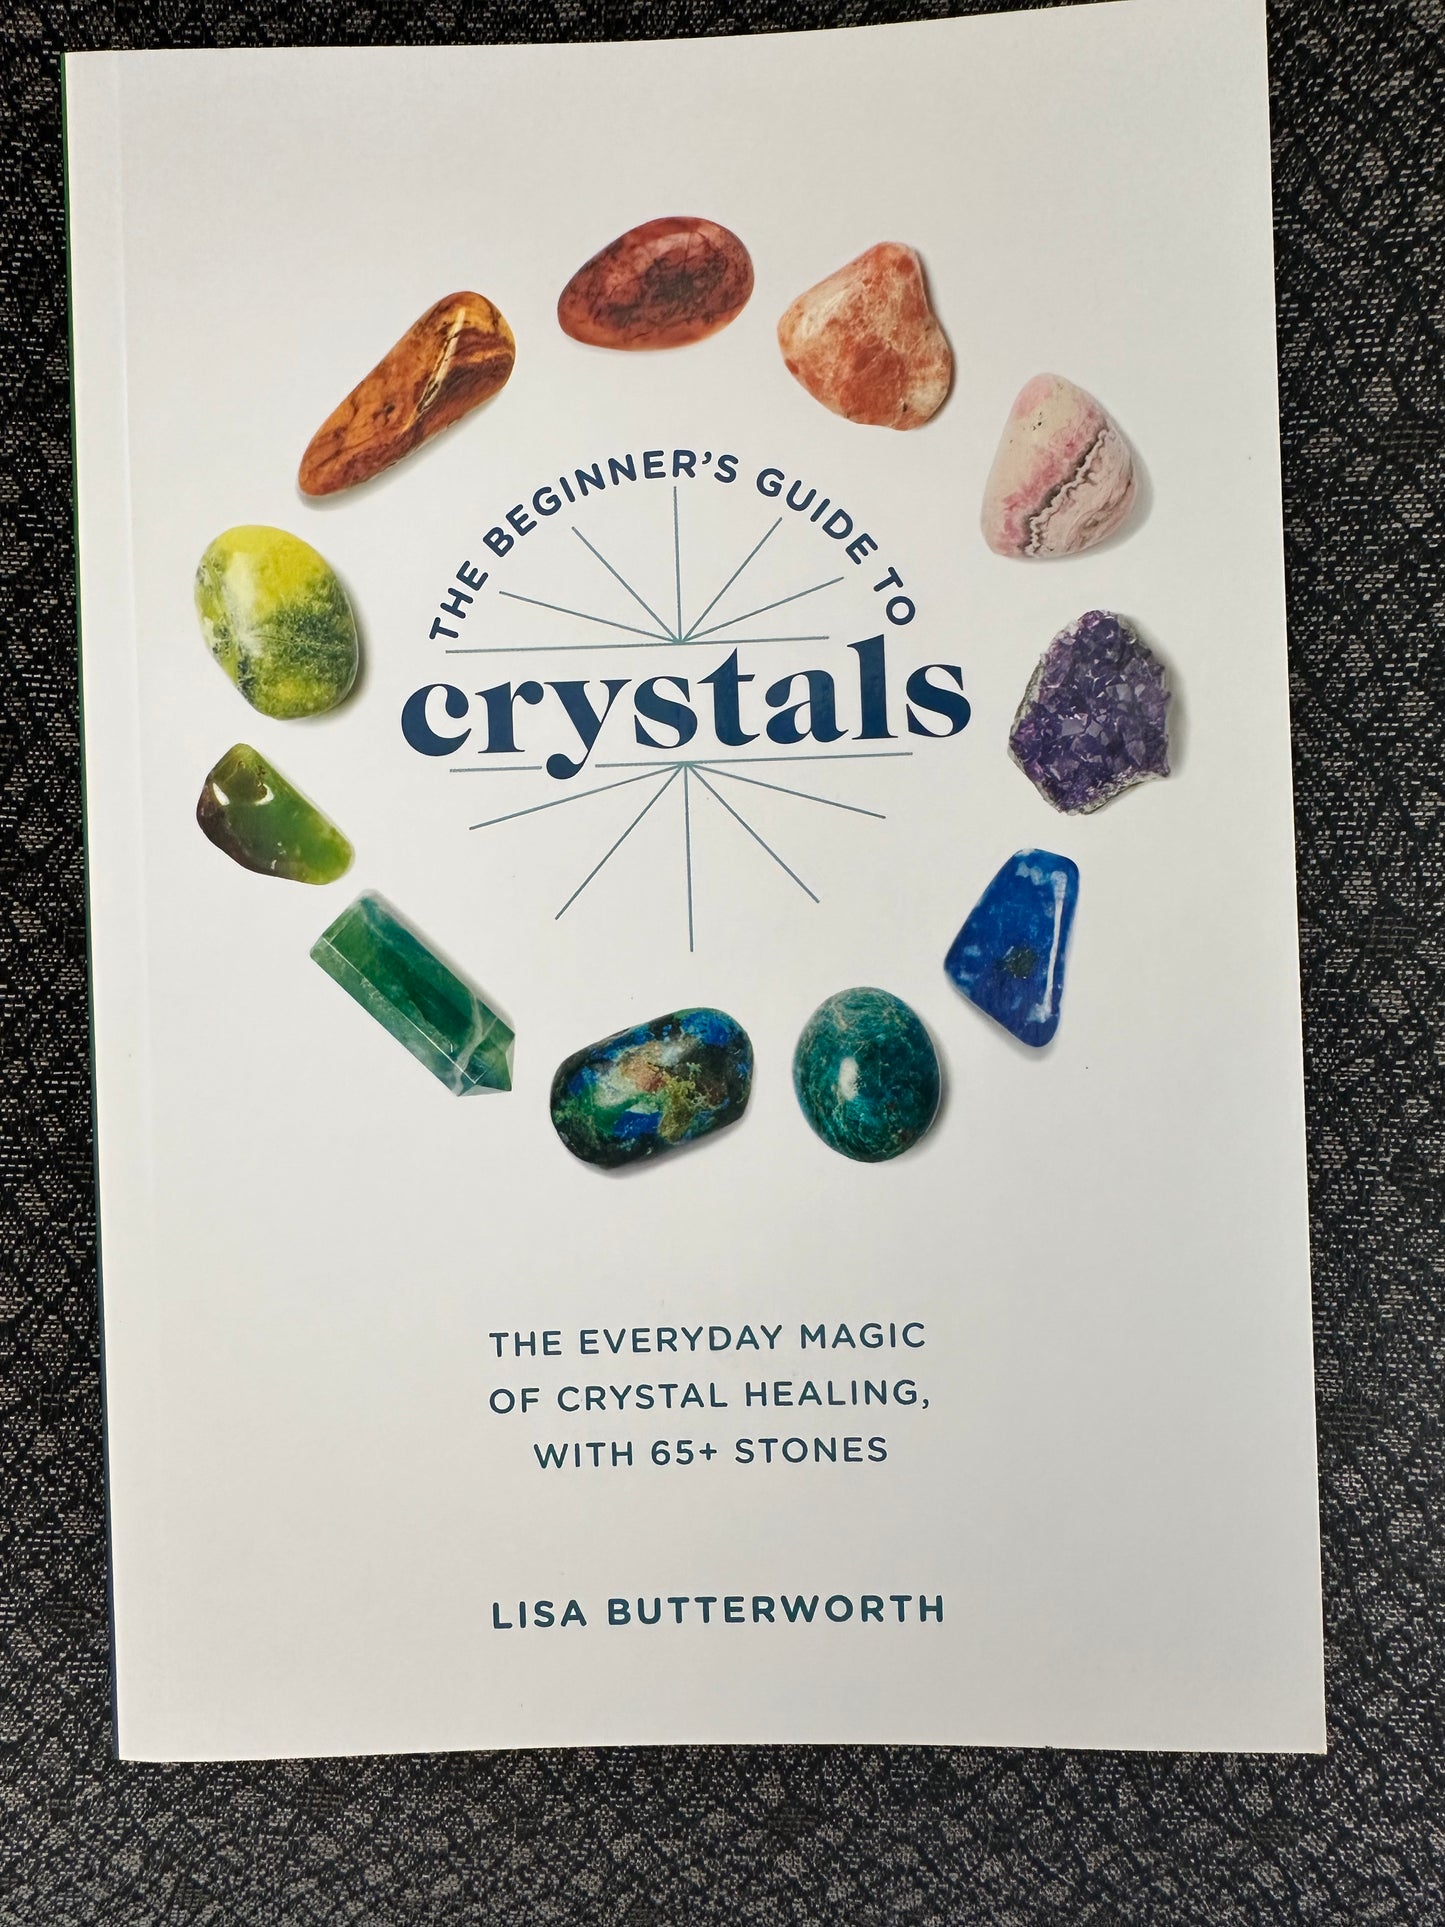 The Beginners Guide to Crystals